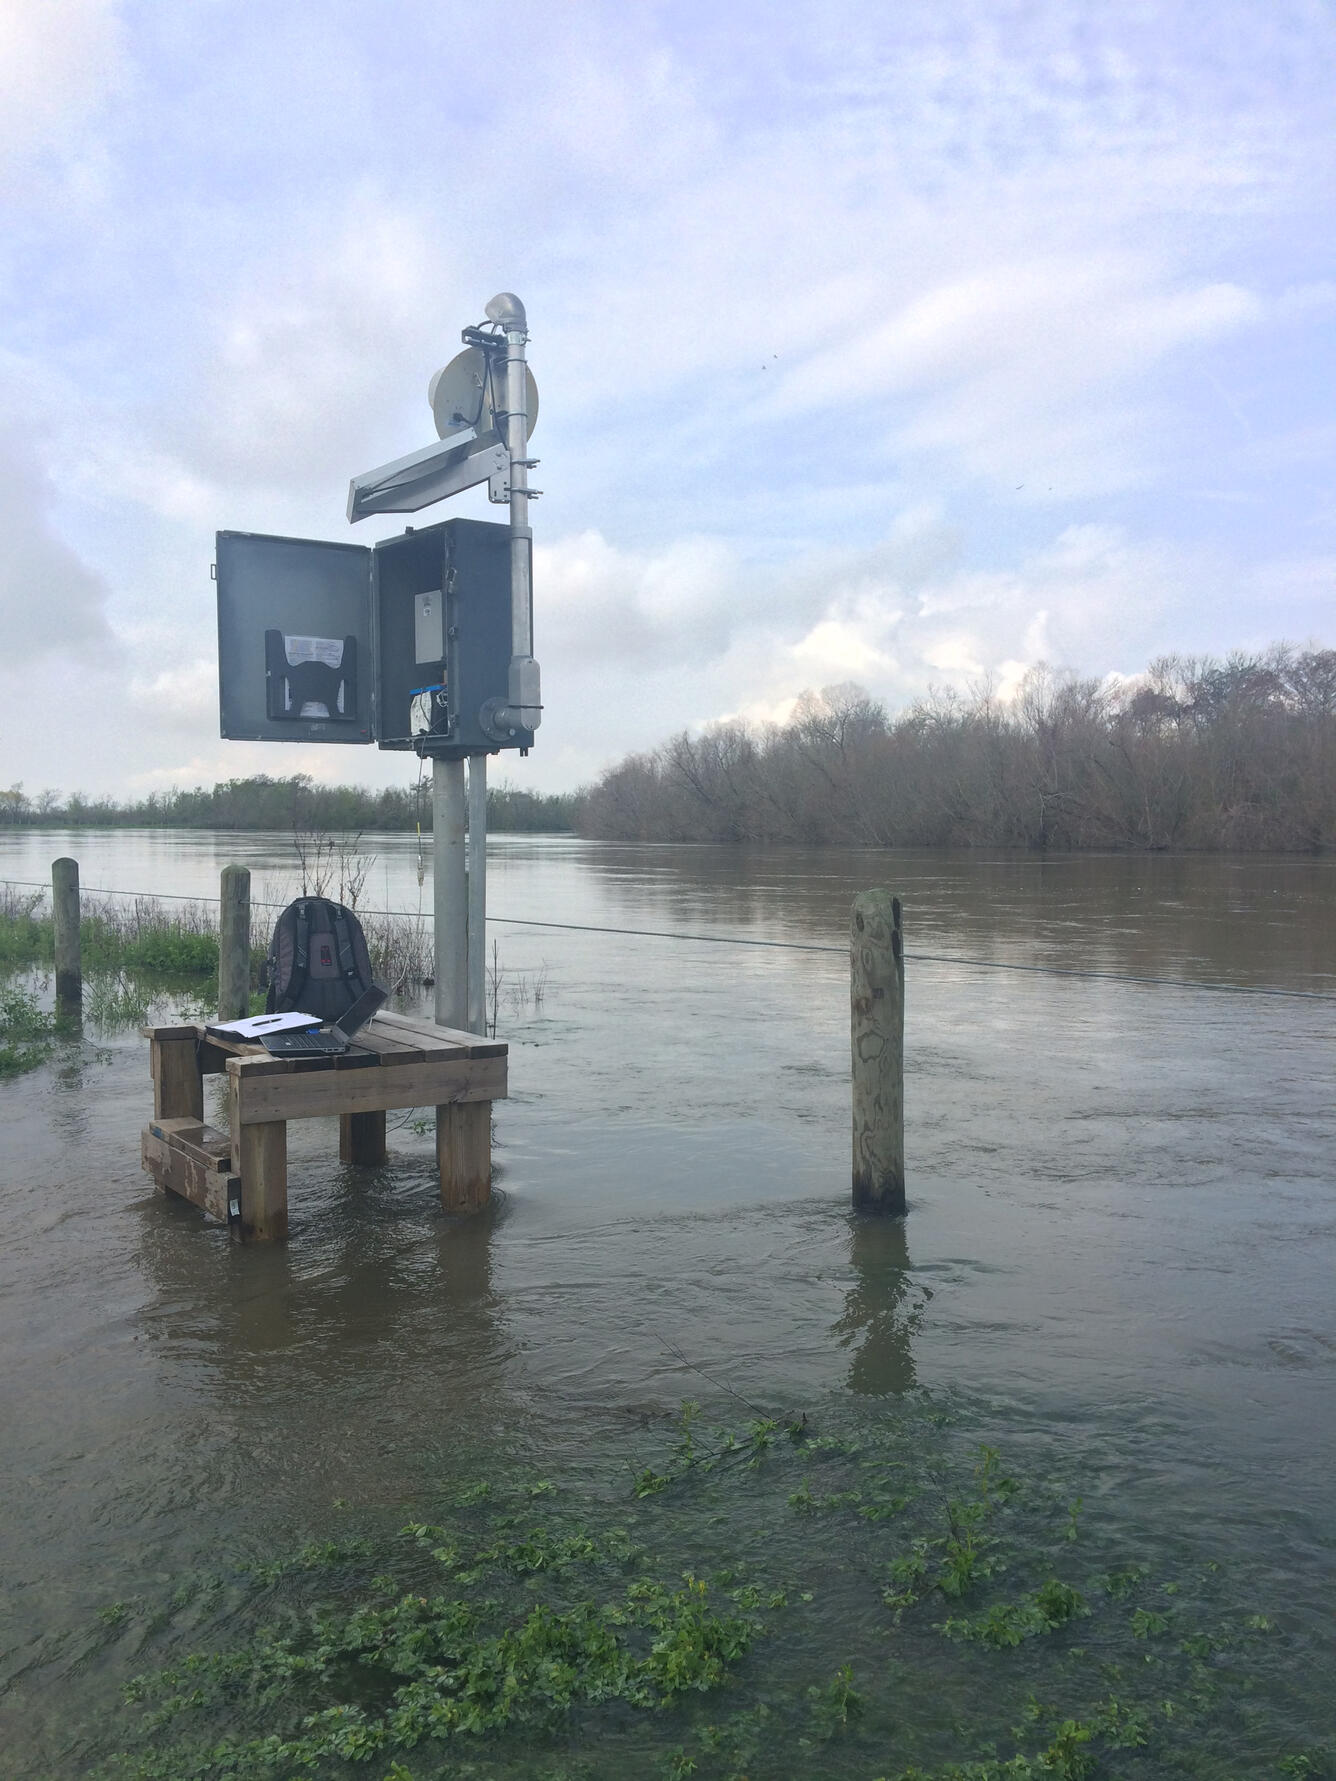 Photo of USGS streamgage measures flooding in the lower Trinity River 